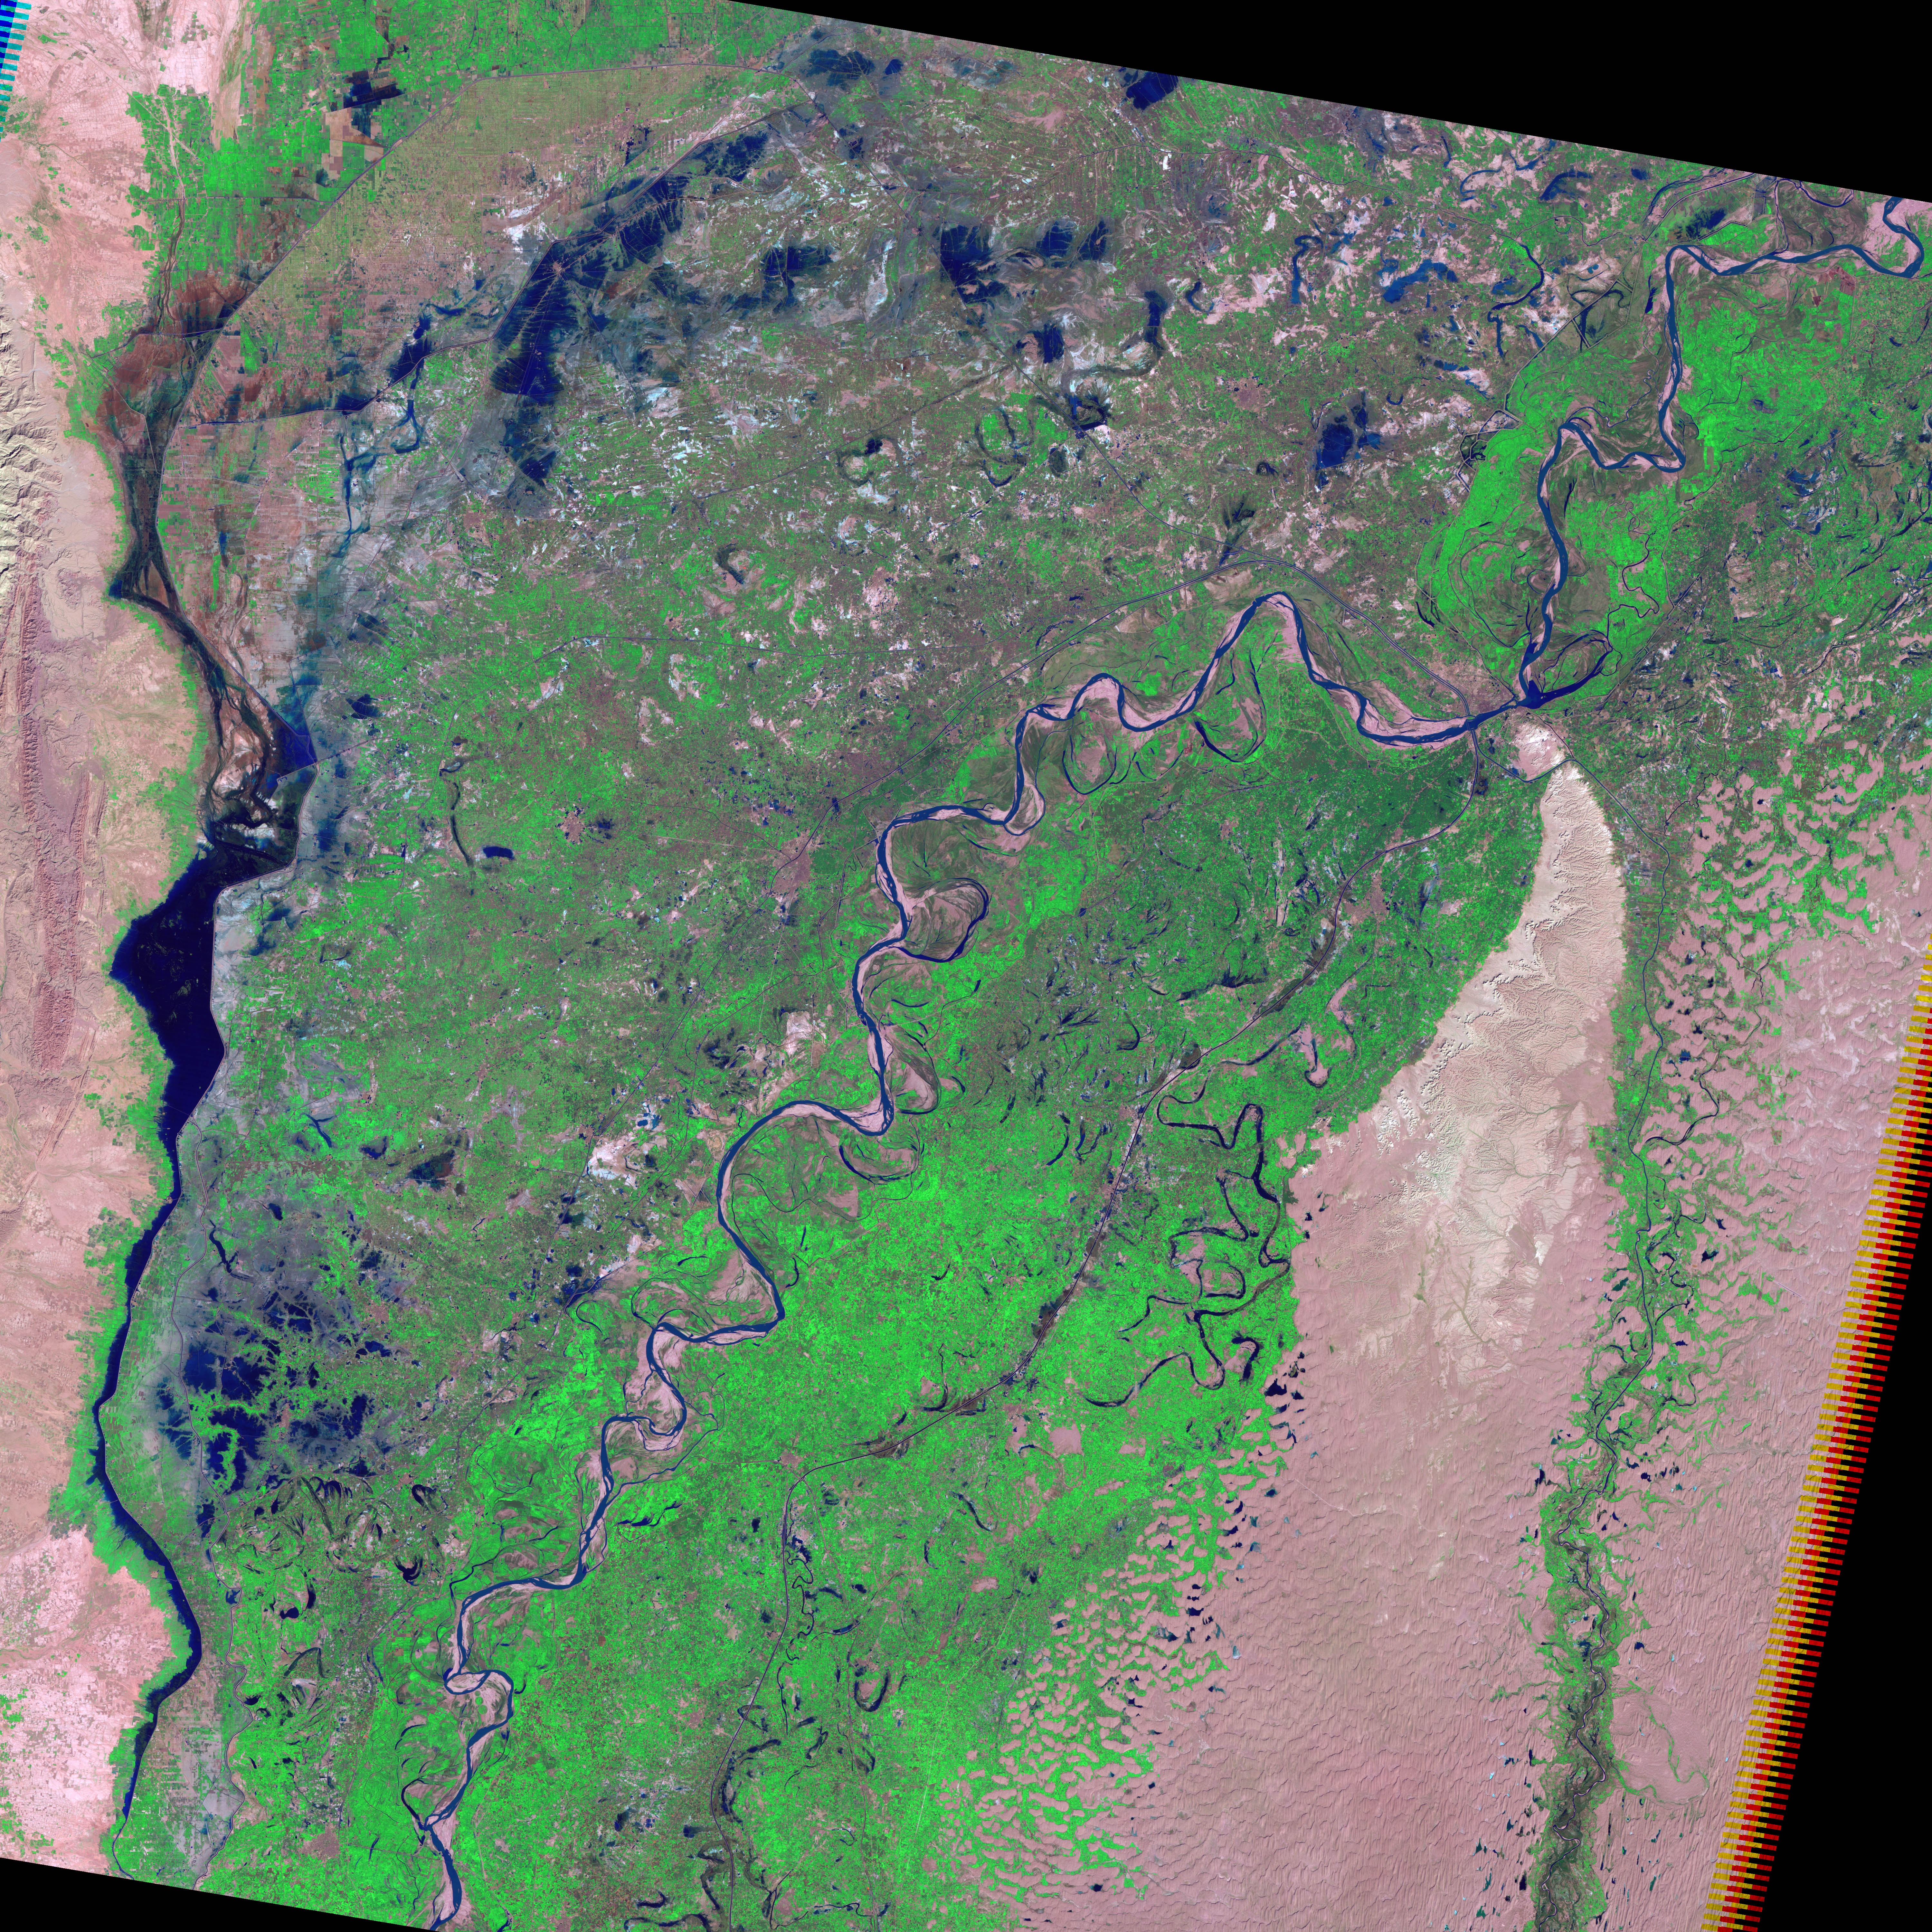 Lingering Floods in Pakistan - related image preview